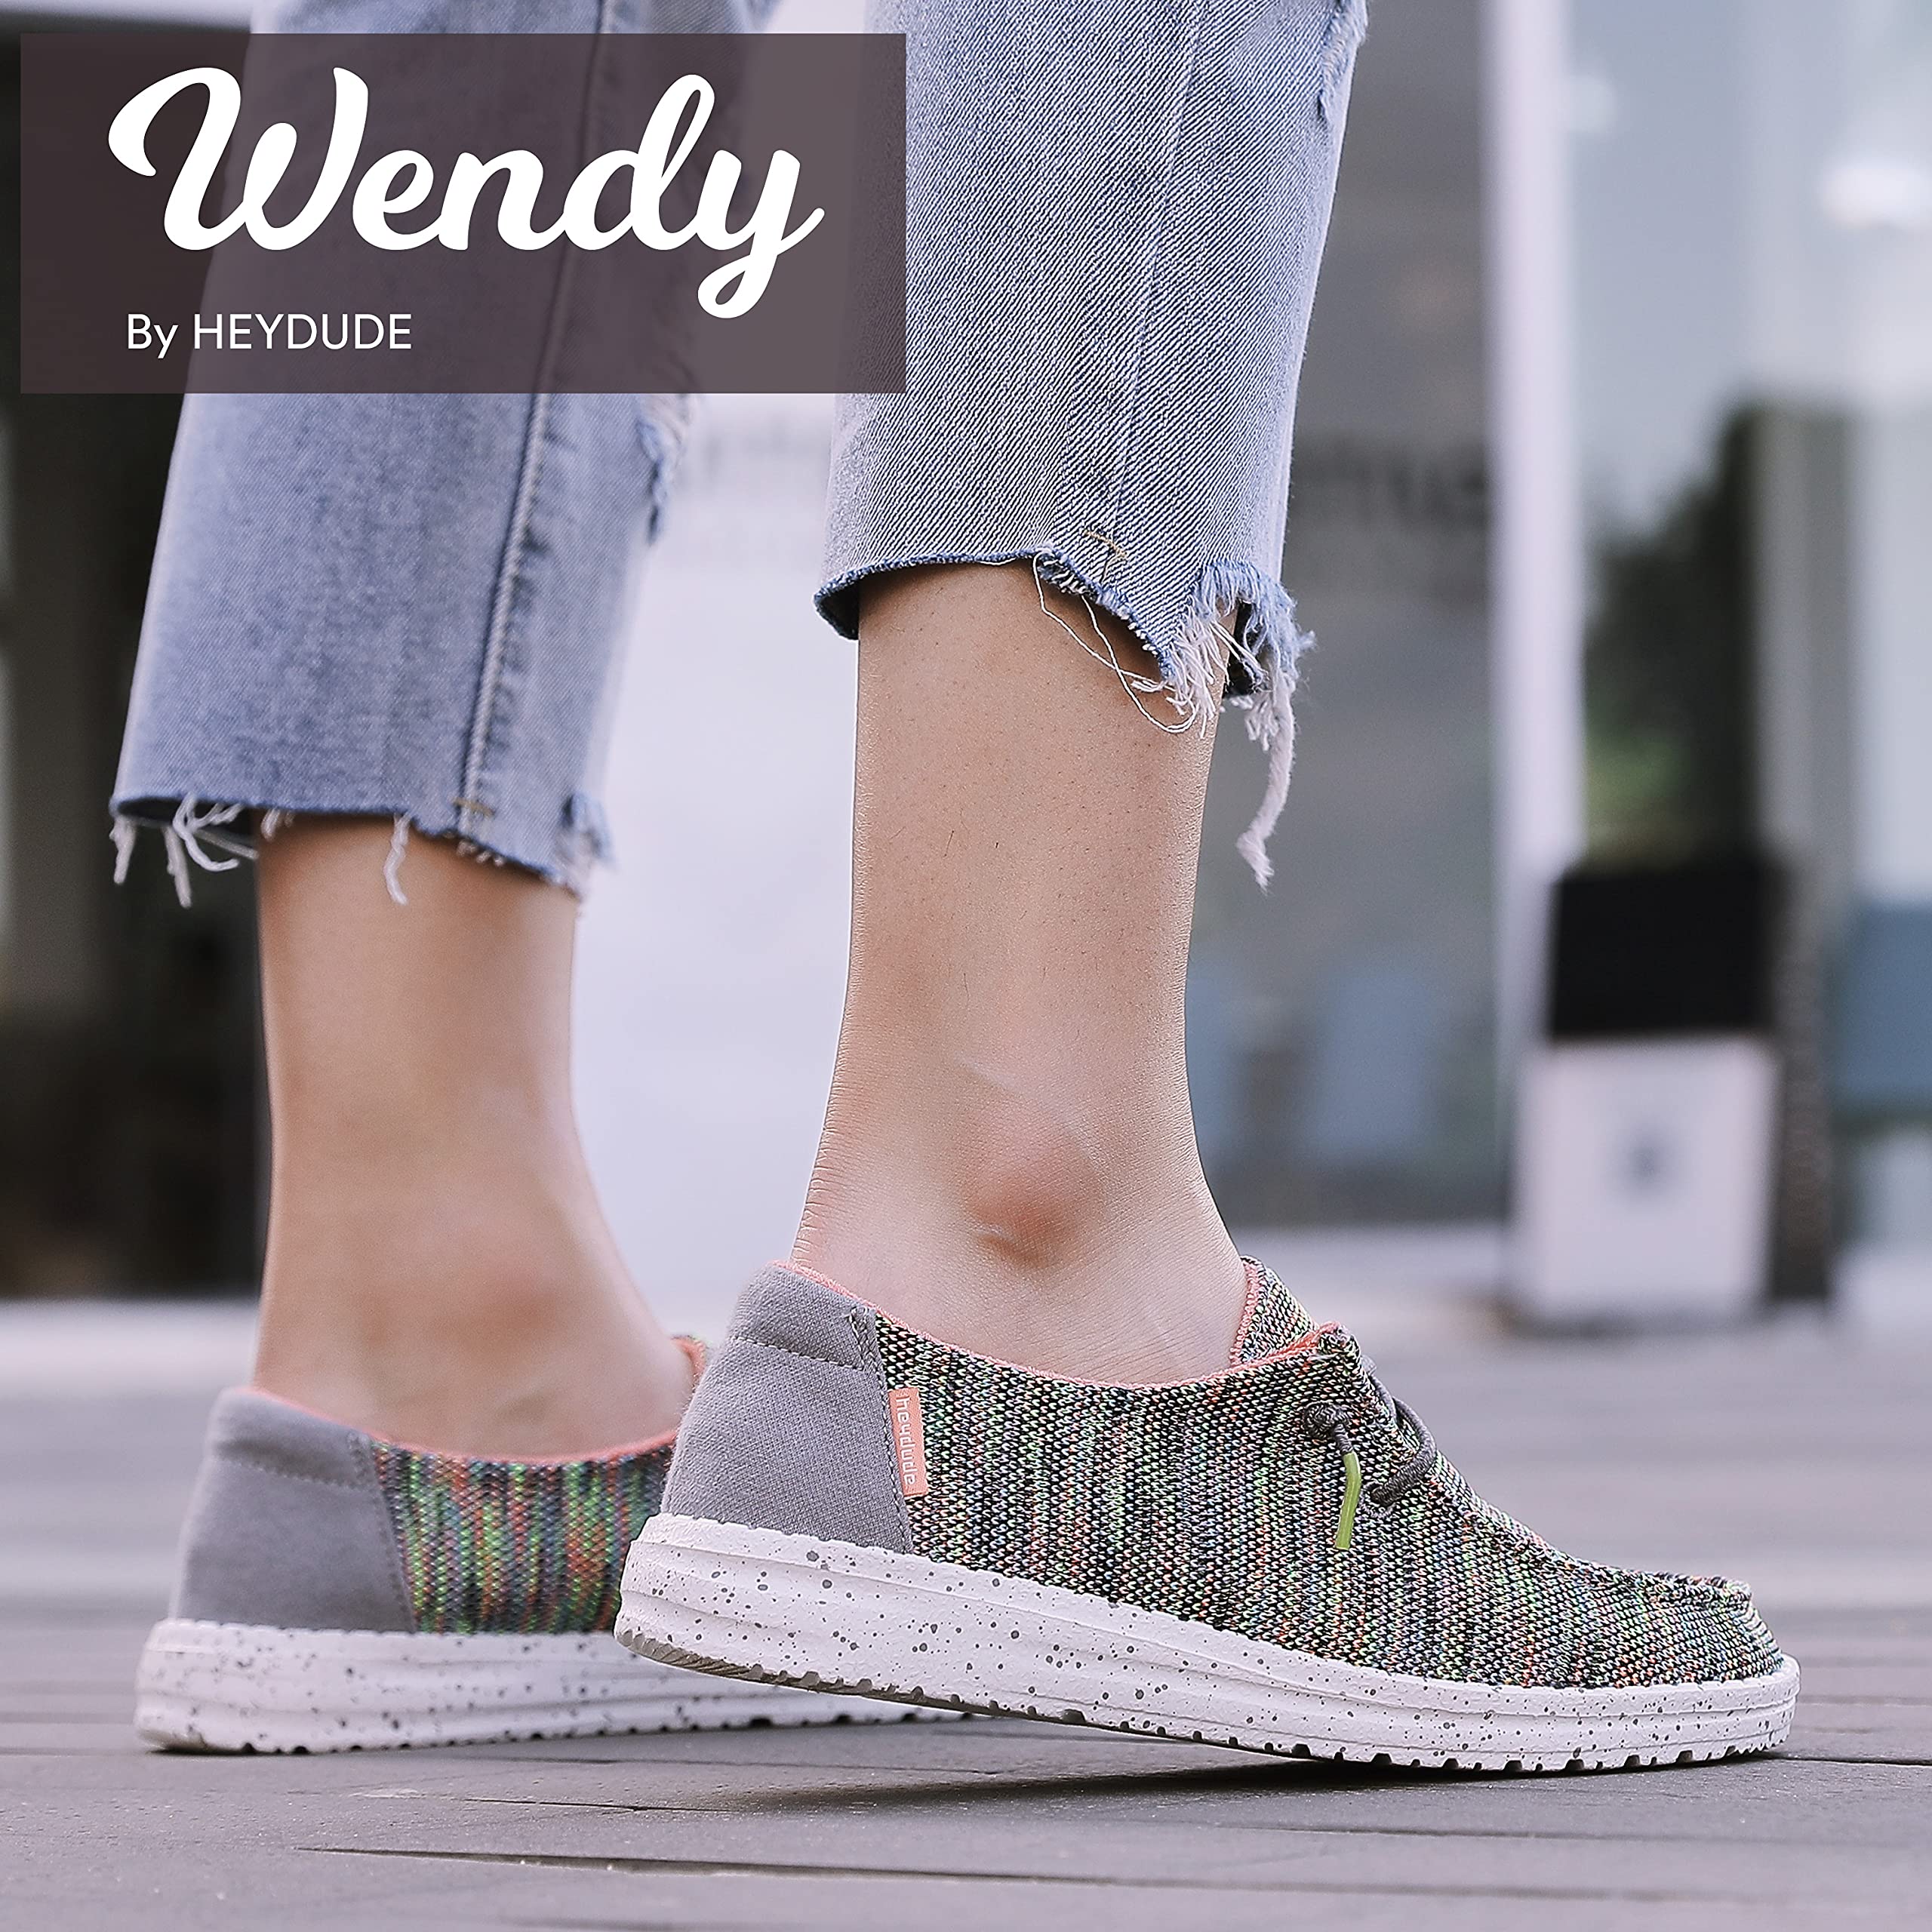 Hey Dude Women's Wendy Wool | Women’s Shoes | Women’s Lace Up Loafers | Comfortable & Light-Weight